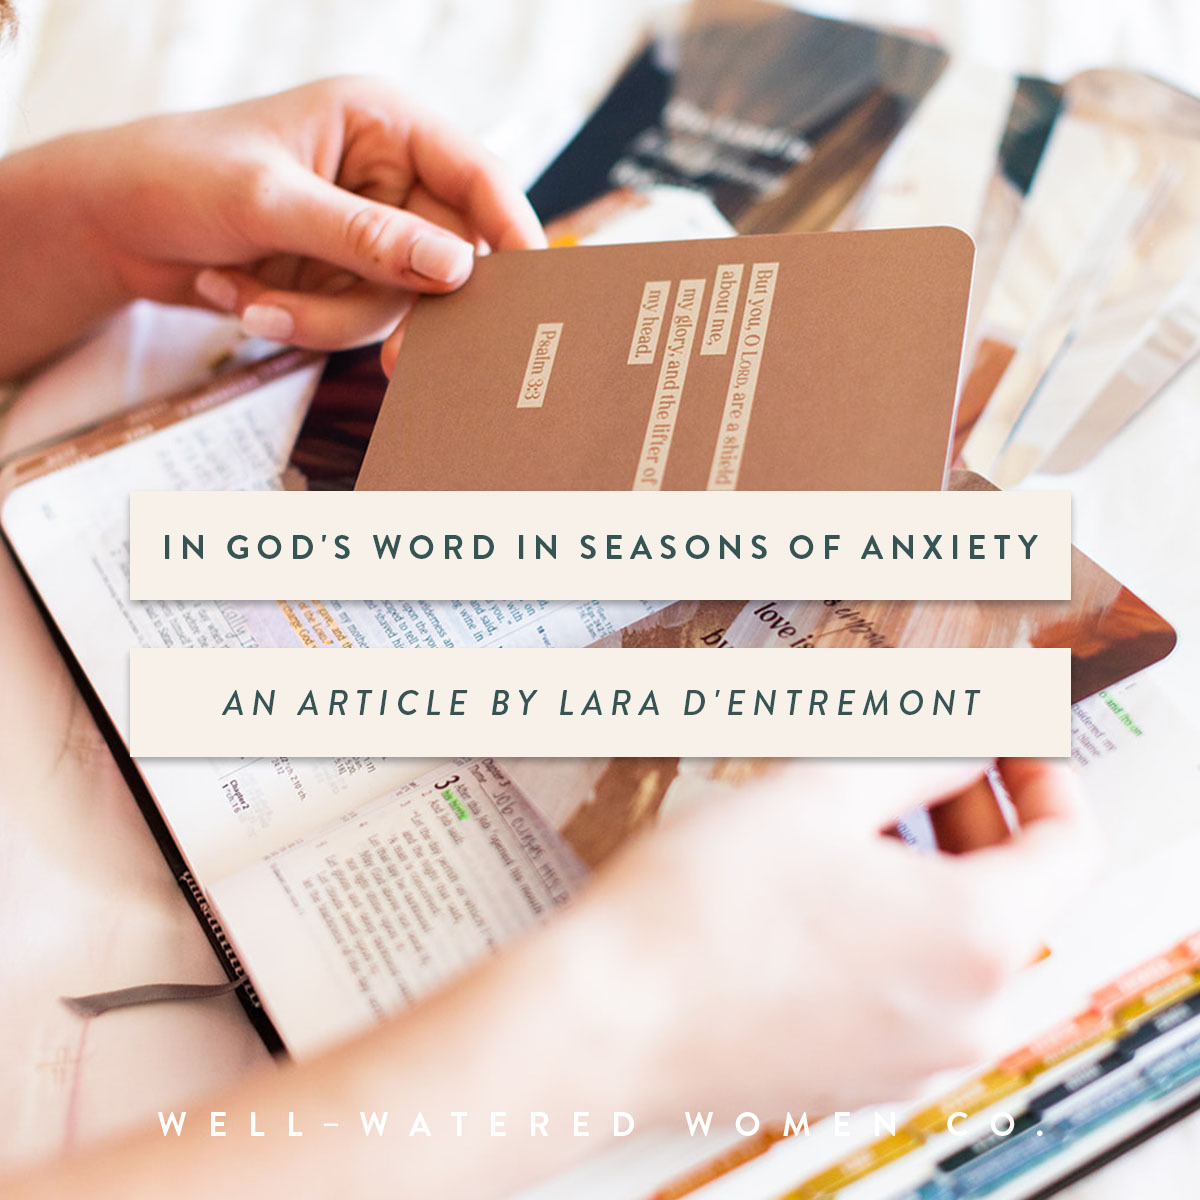 In God’s Word in Seasons of Anxiety